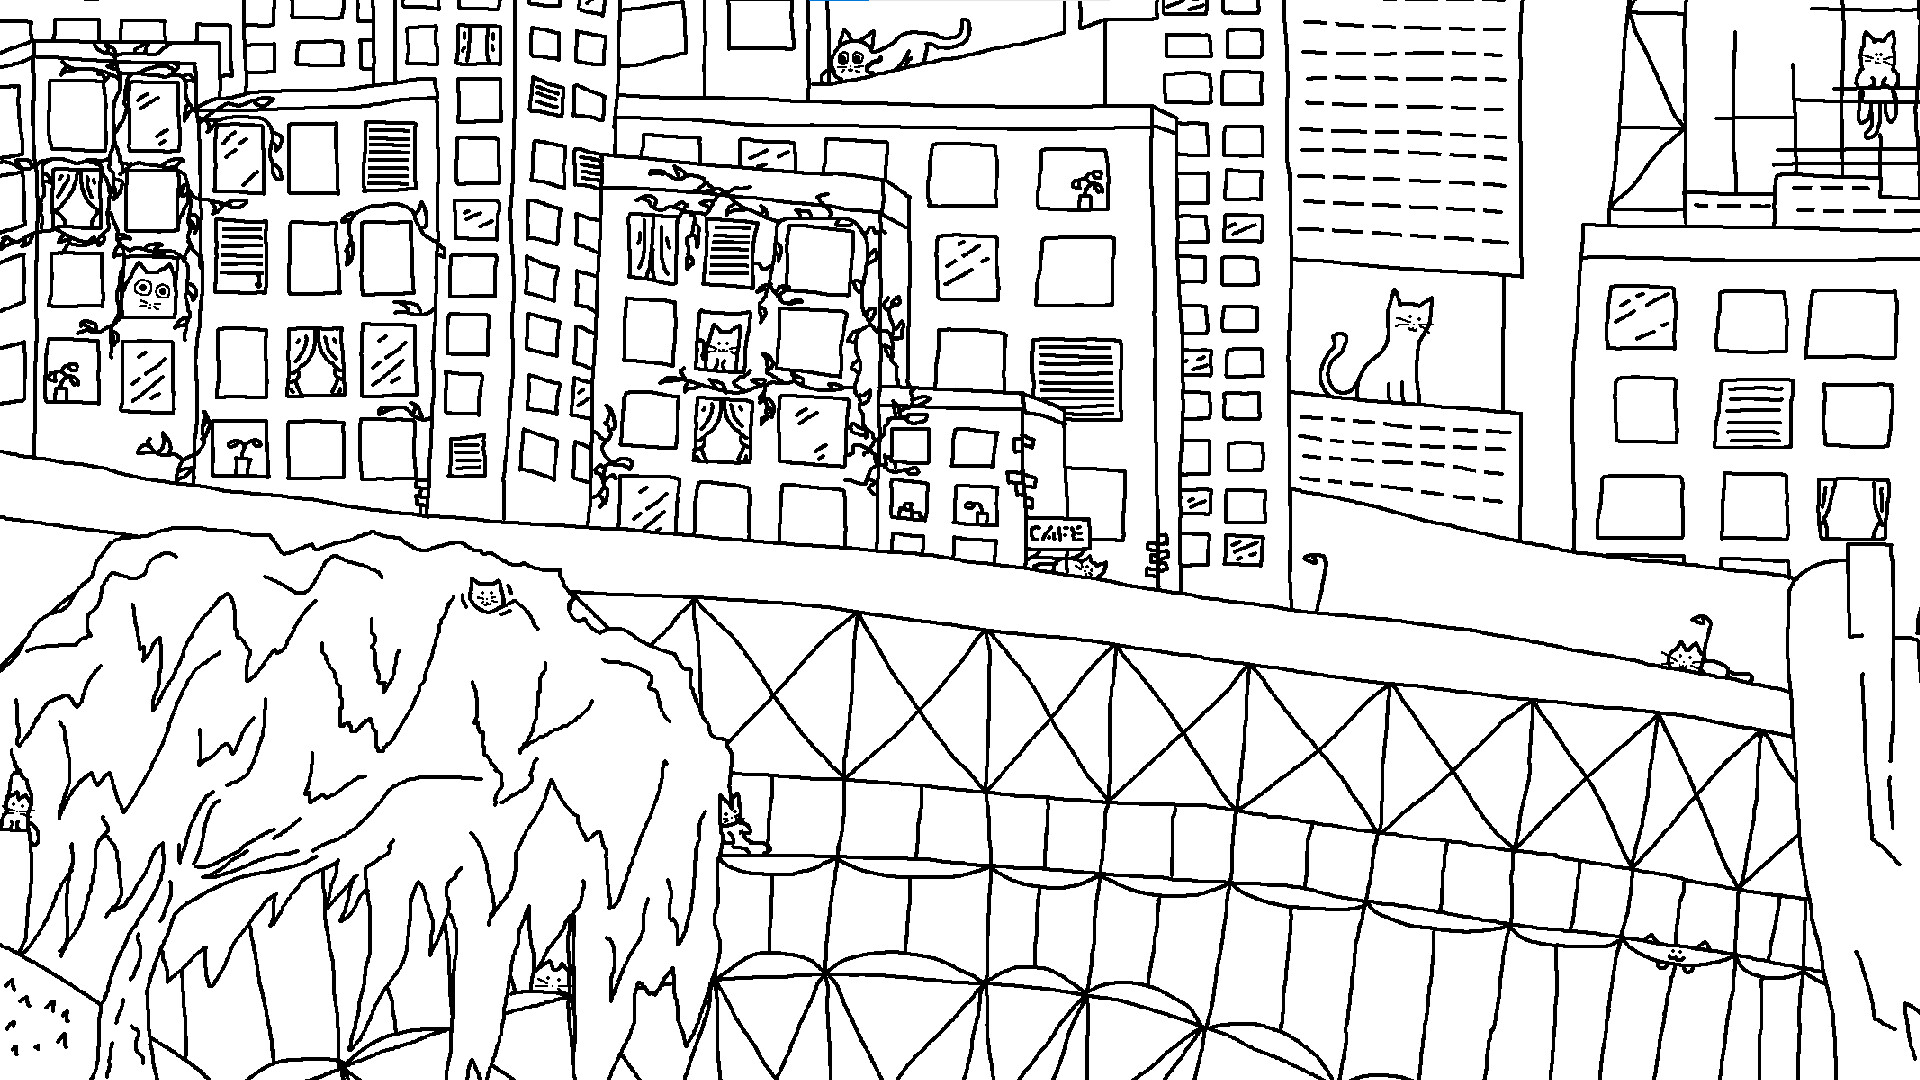 Looking For Cats In a Badly Drawn City on Steam